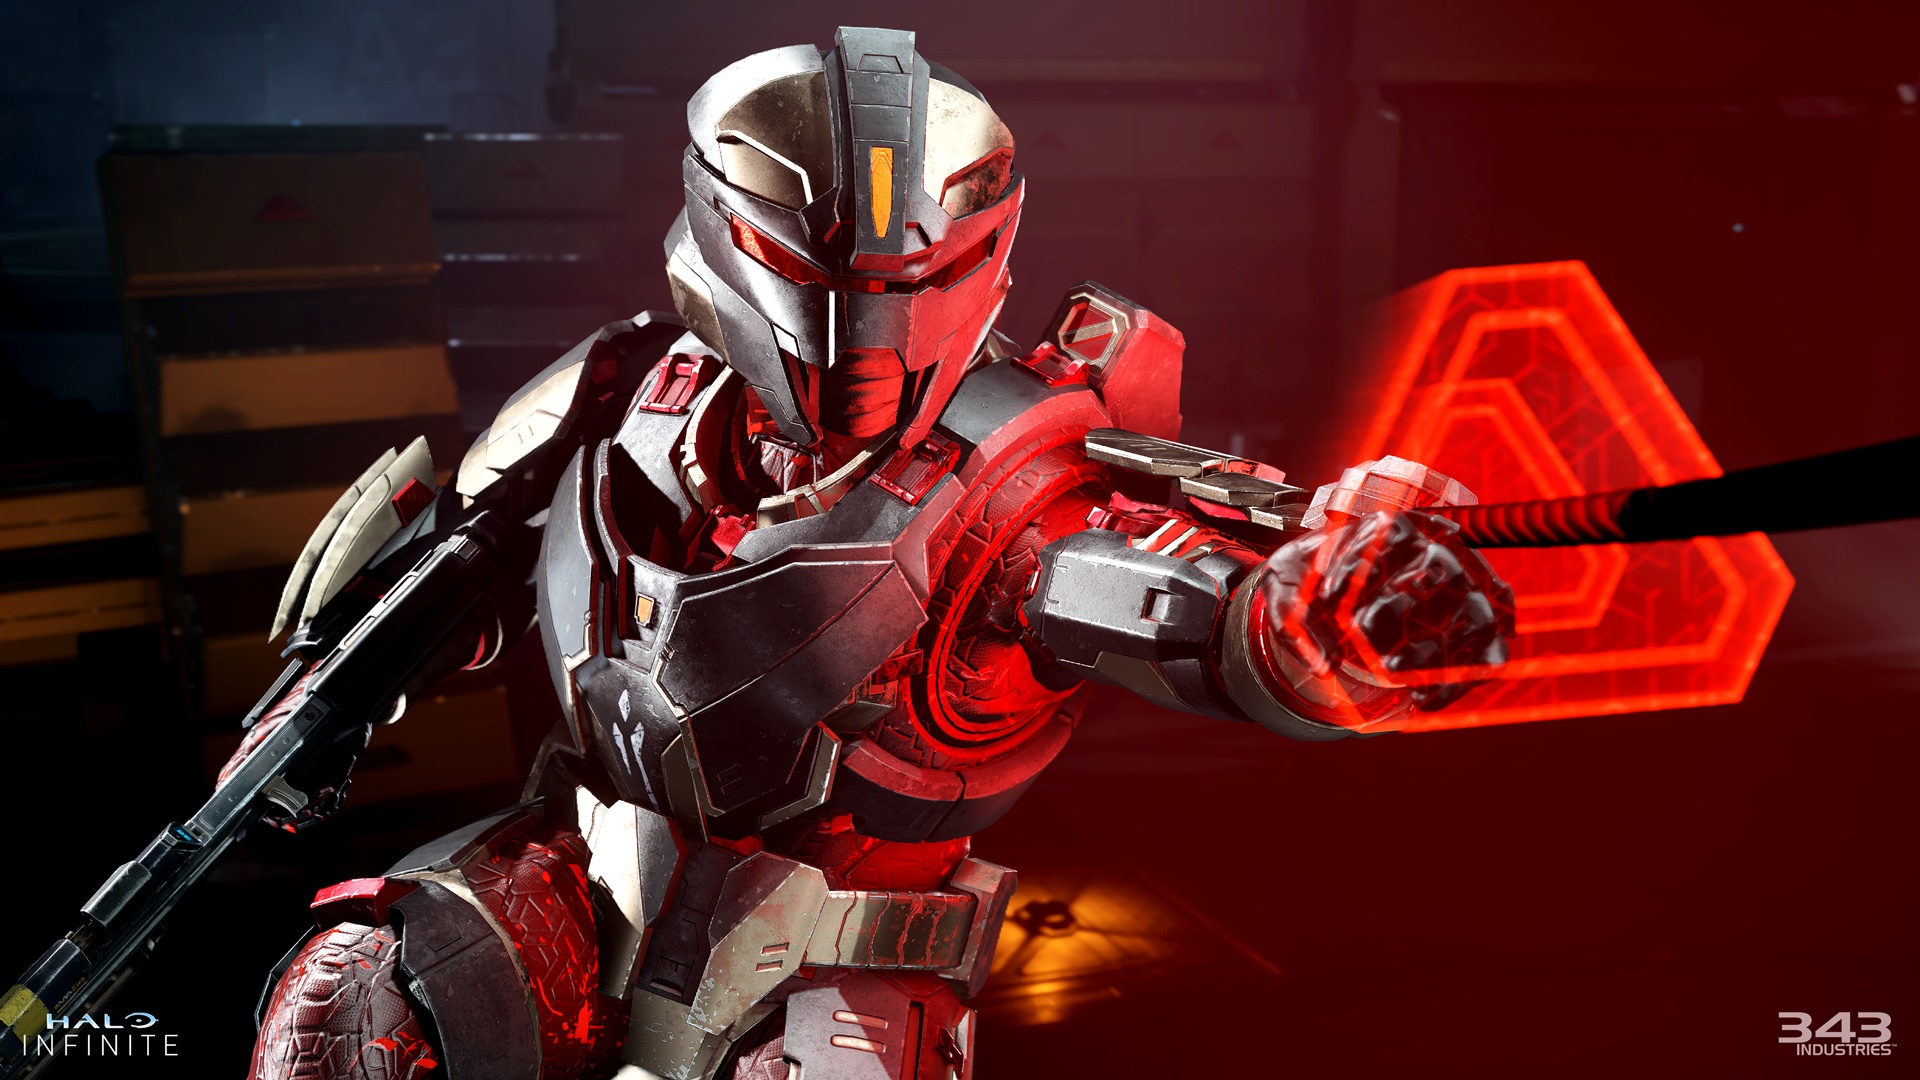 Halo Infinite screenshot of a Spartan in Banished-themed armor using the grappleshot